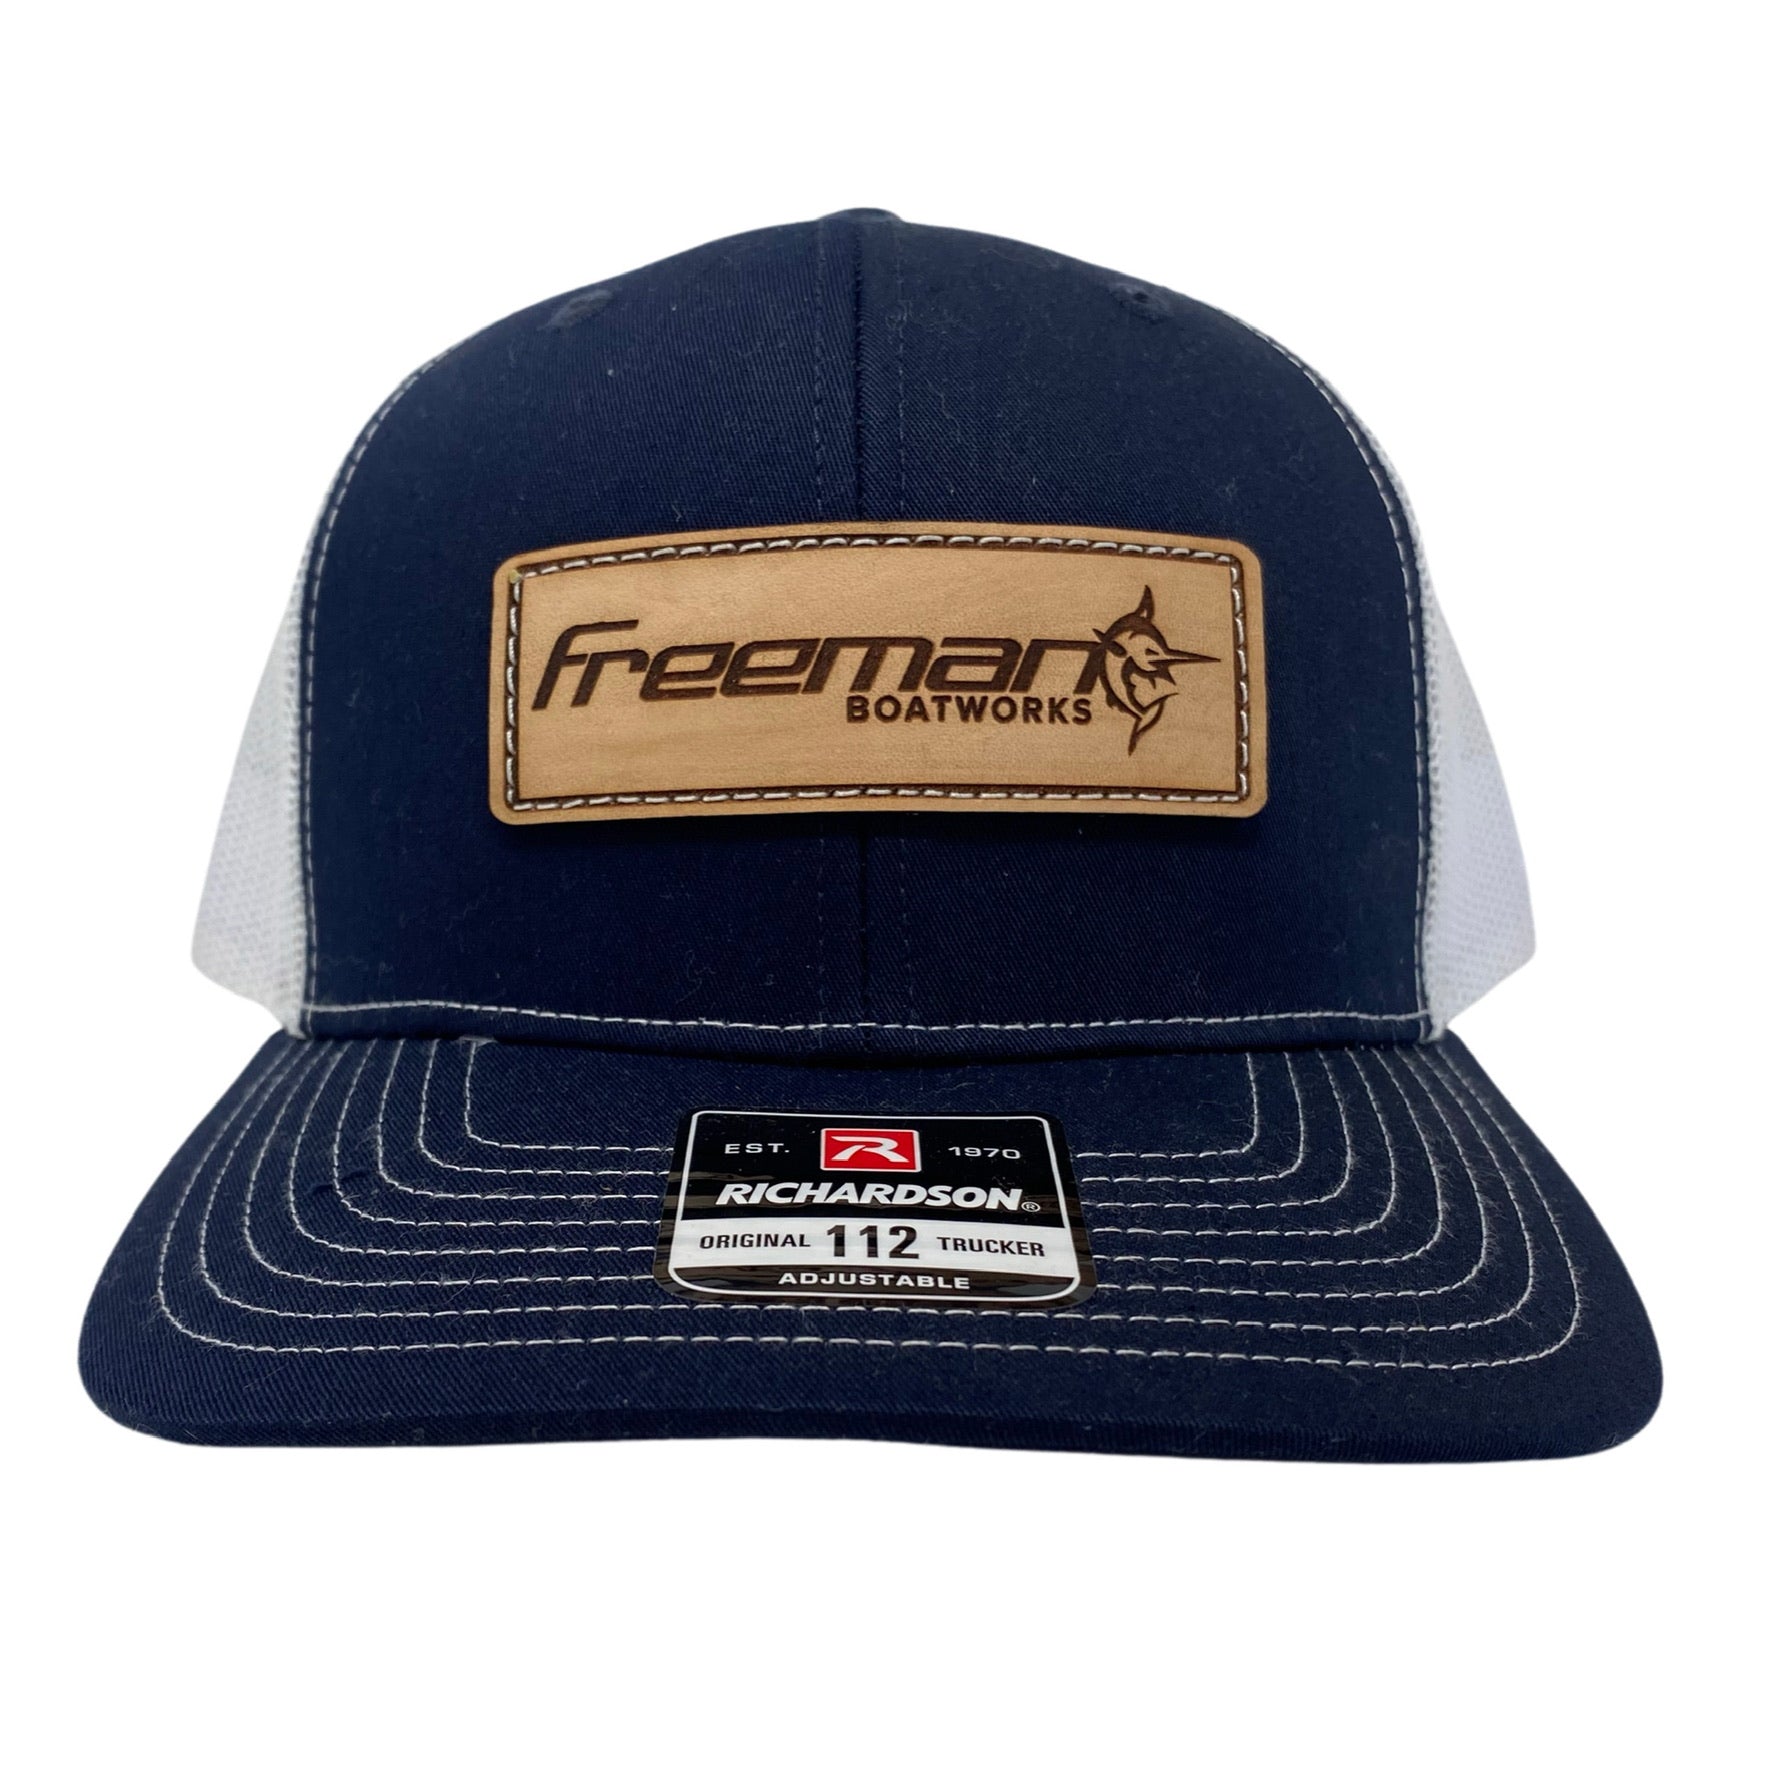 Freeman Boatworks Leather Patch Trucker - Limited Edition